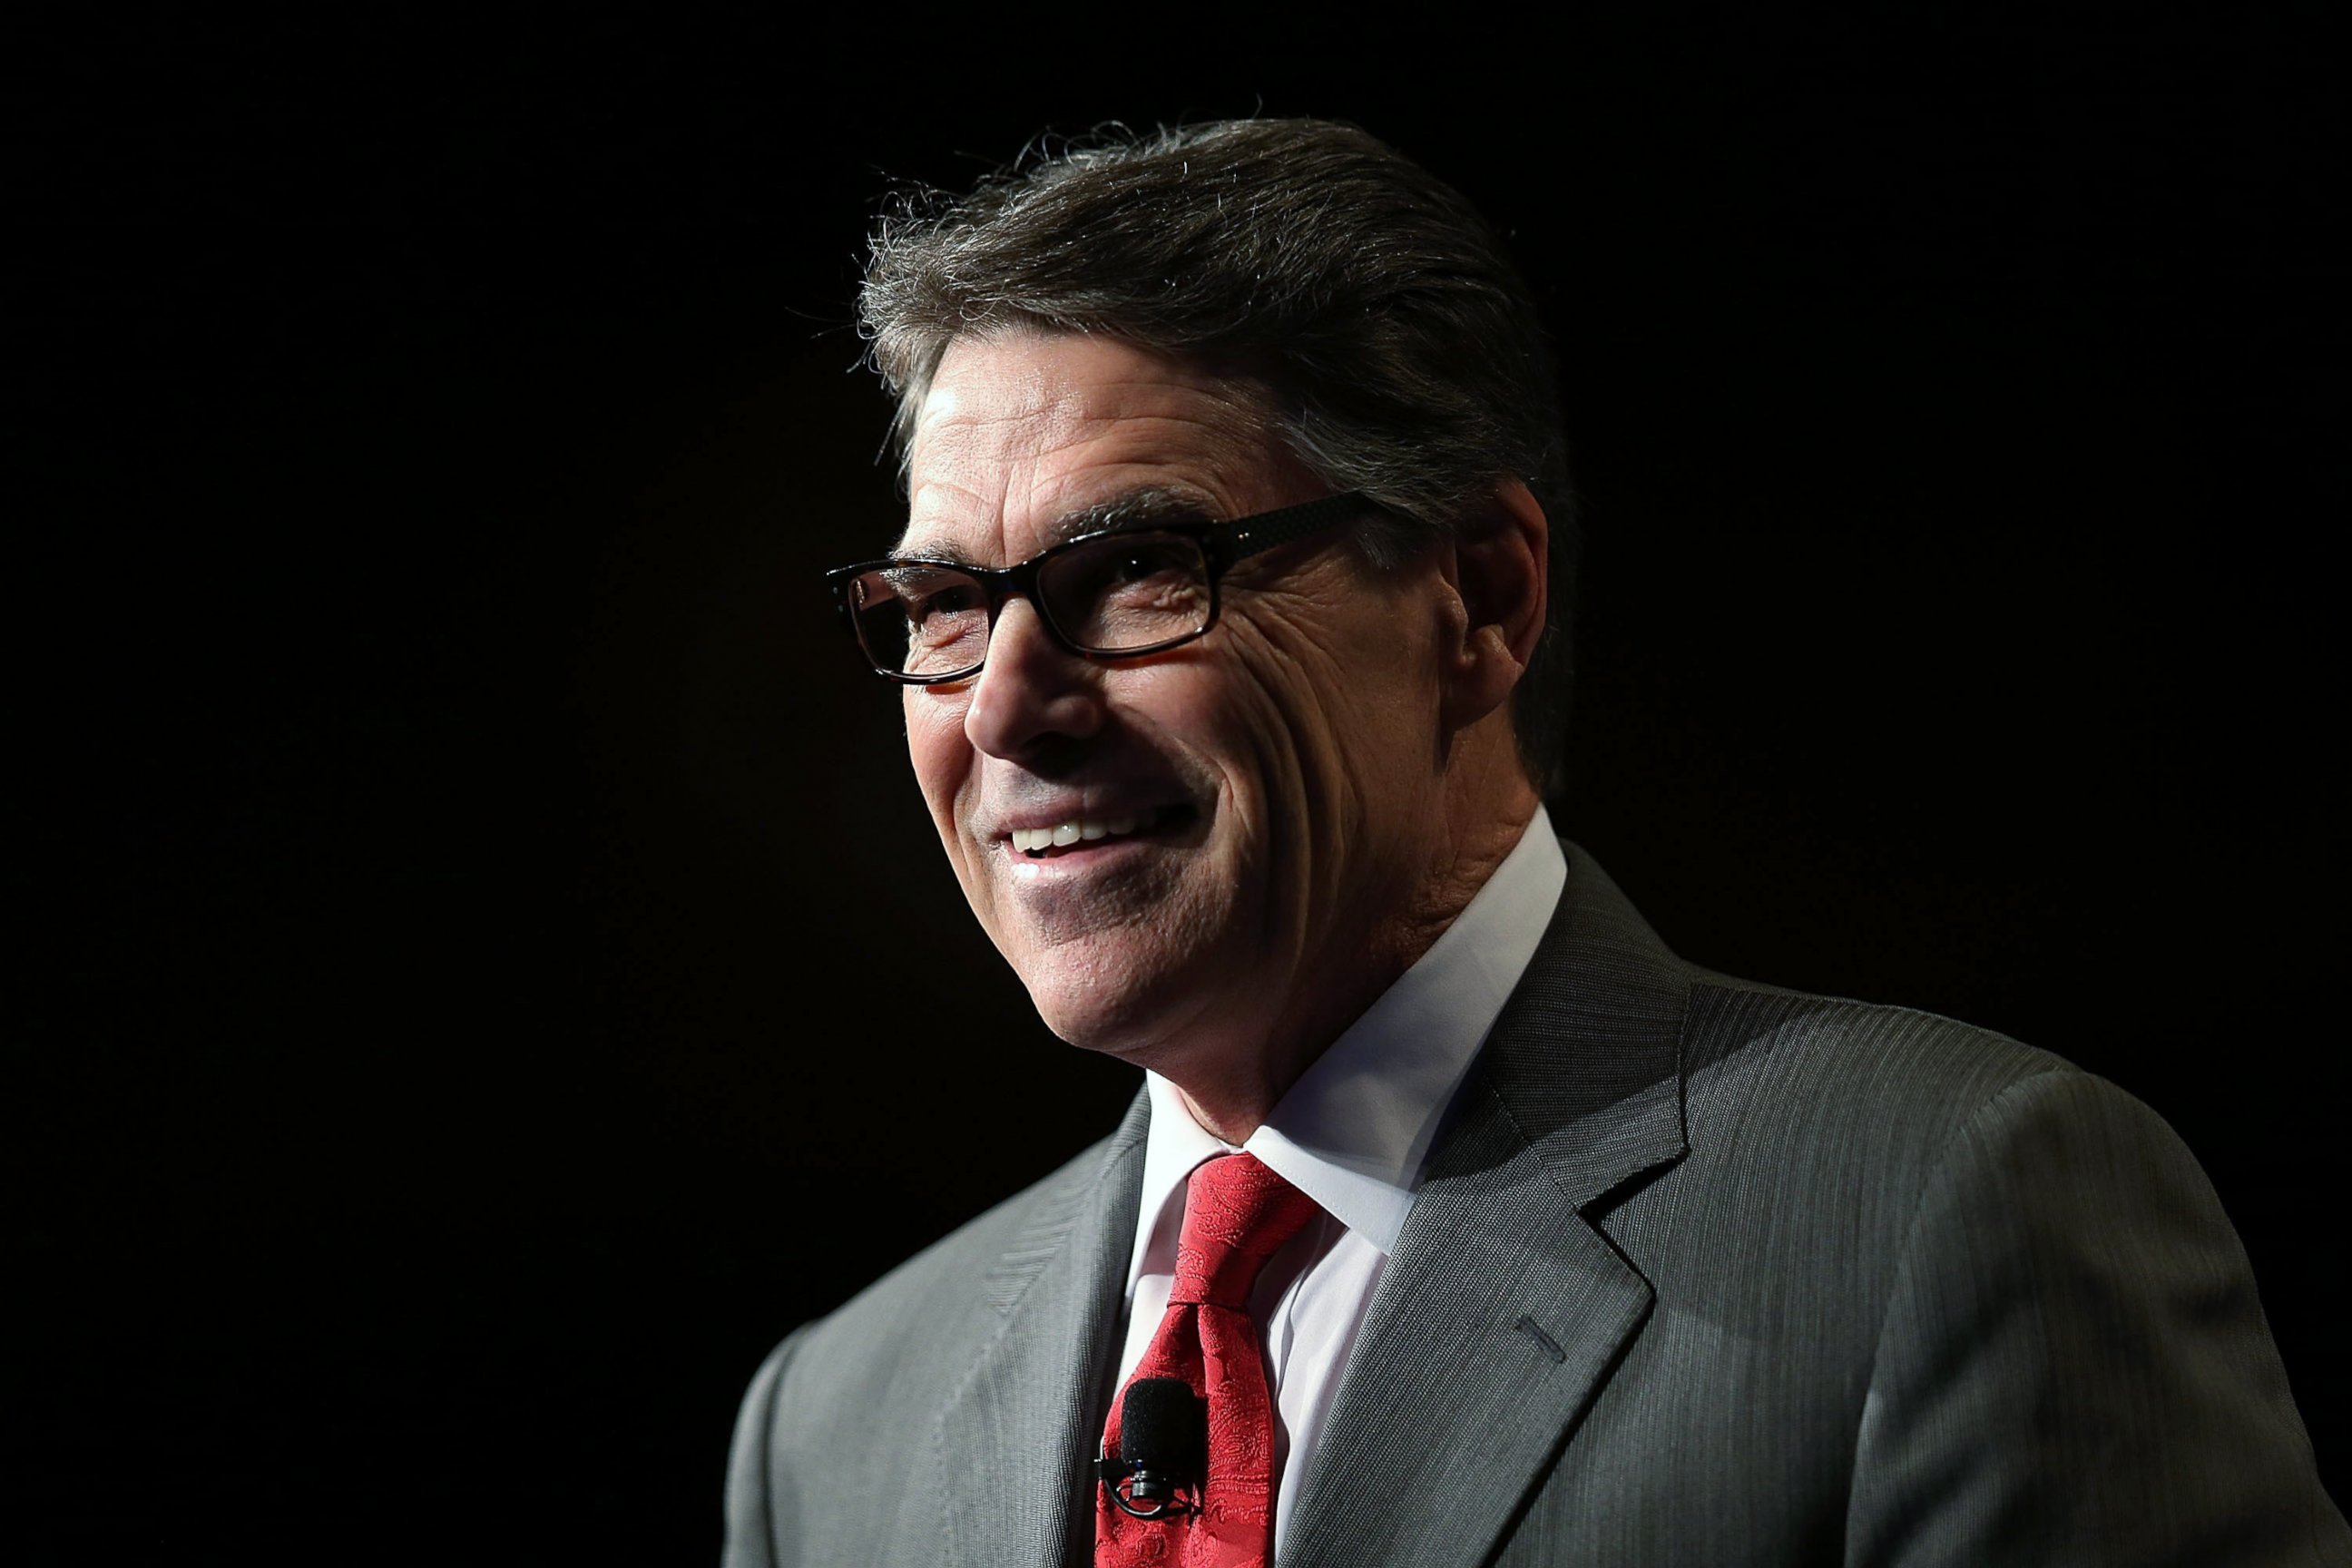 PHOTO: Former Texas Governor Rick Perry speaks during the Rick Scott's Economic Growth Summit on June 2, 2015 in Orlando, Fla.